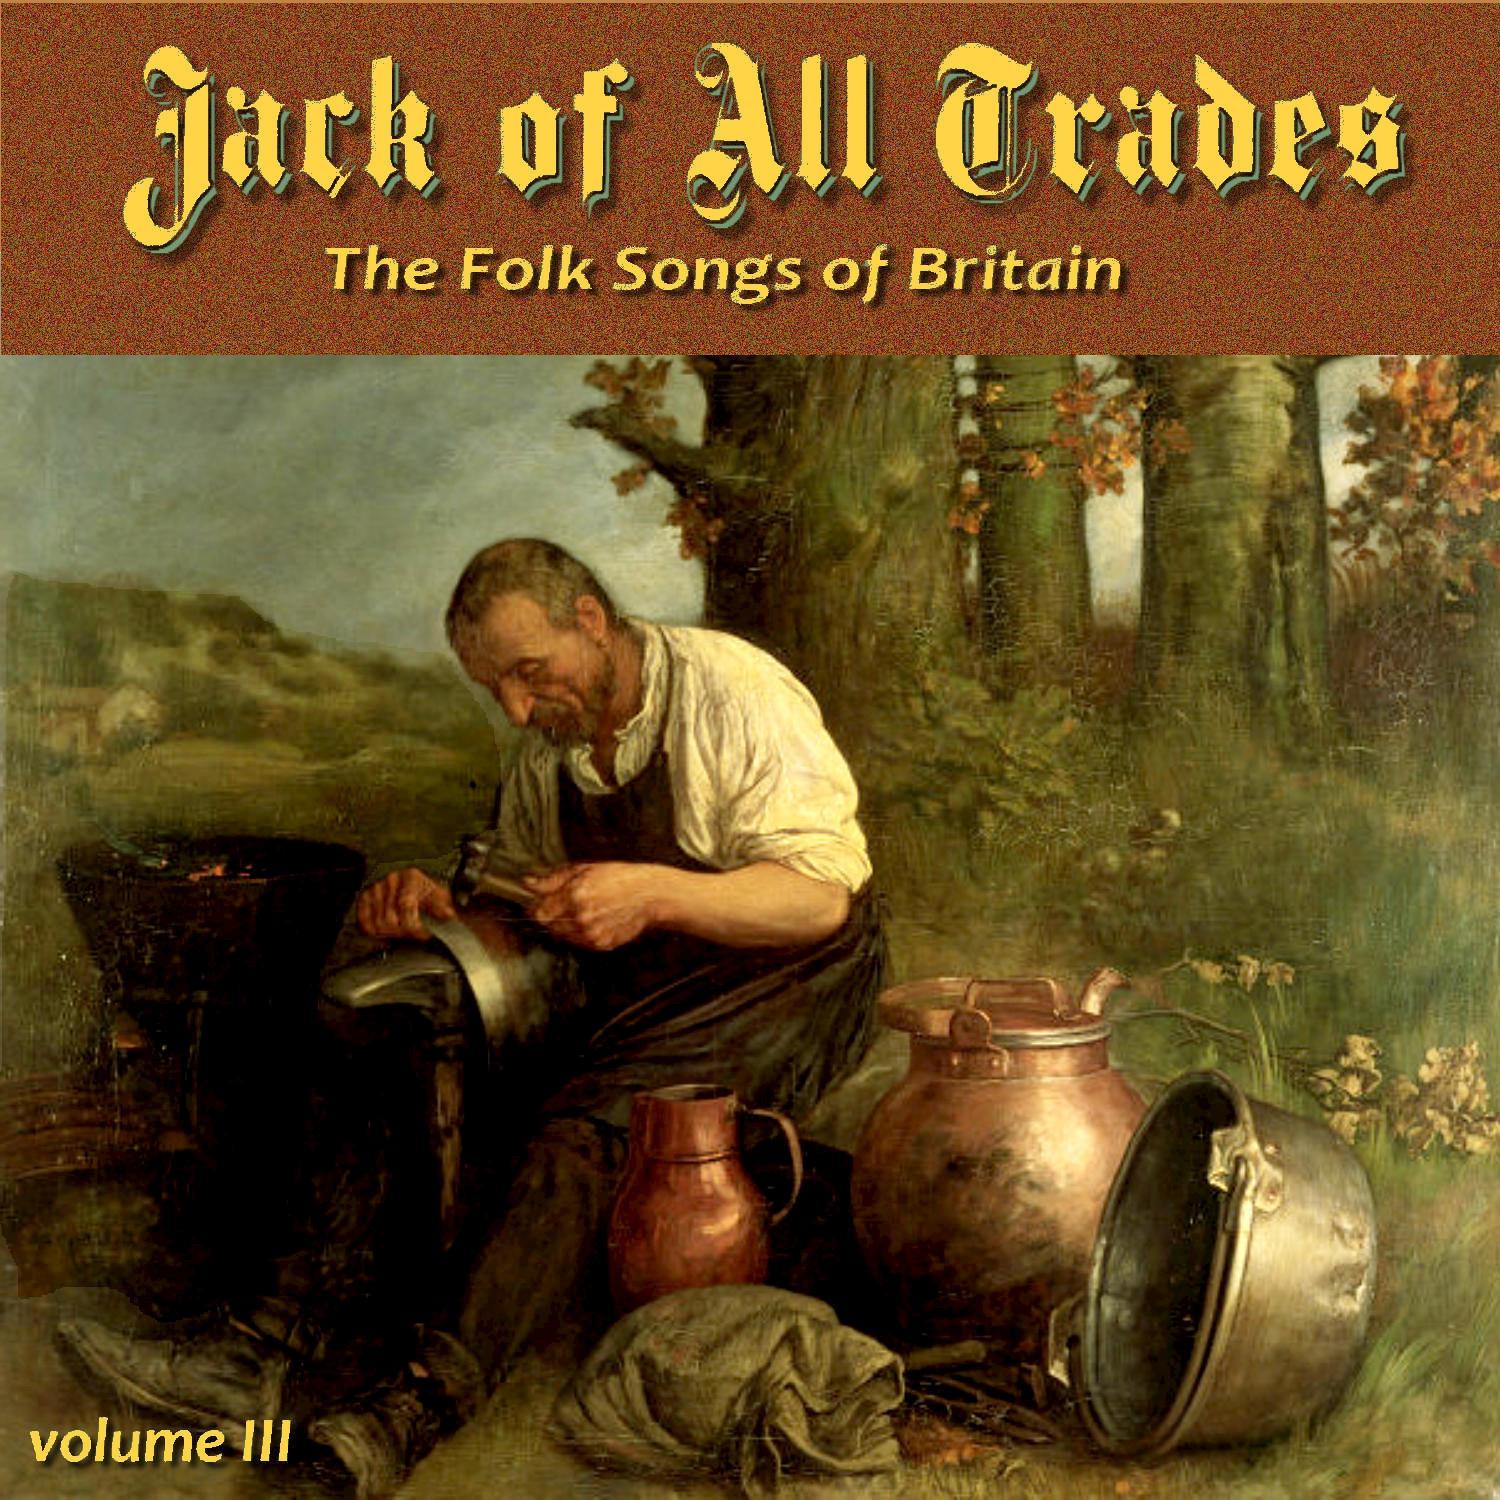 Jack of All Trades, the Folk Songs of Britain, Vol. III